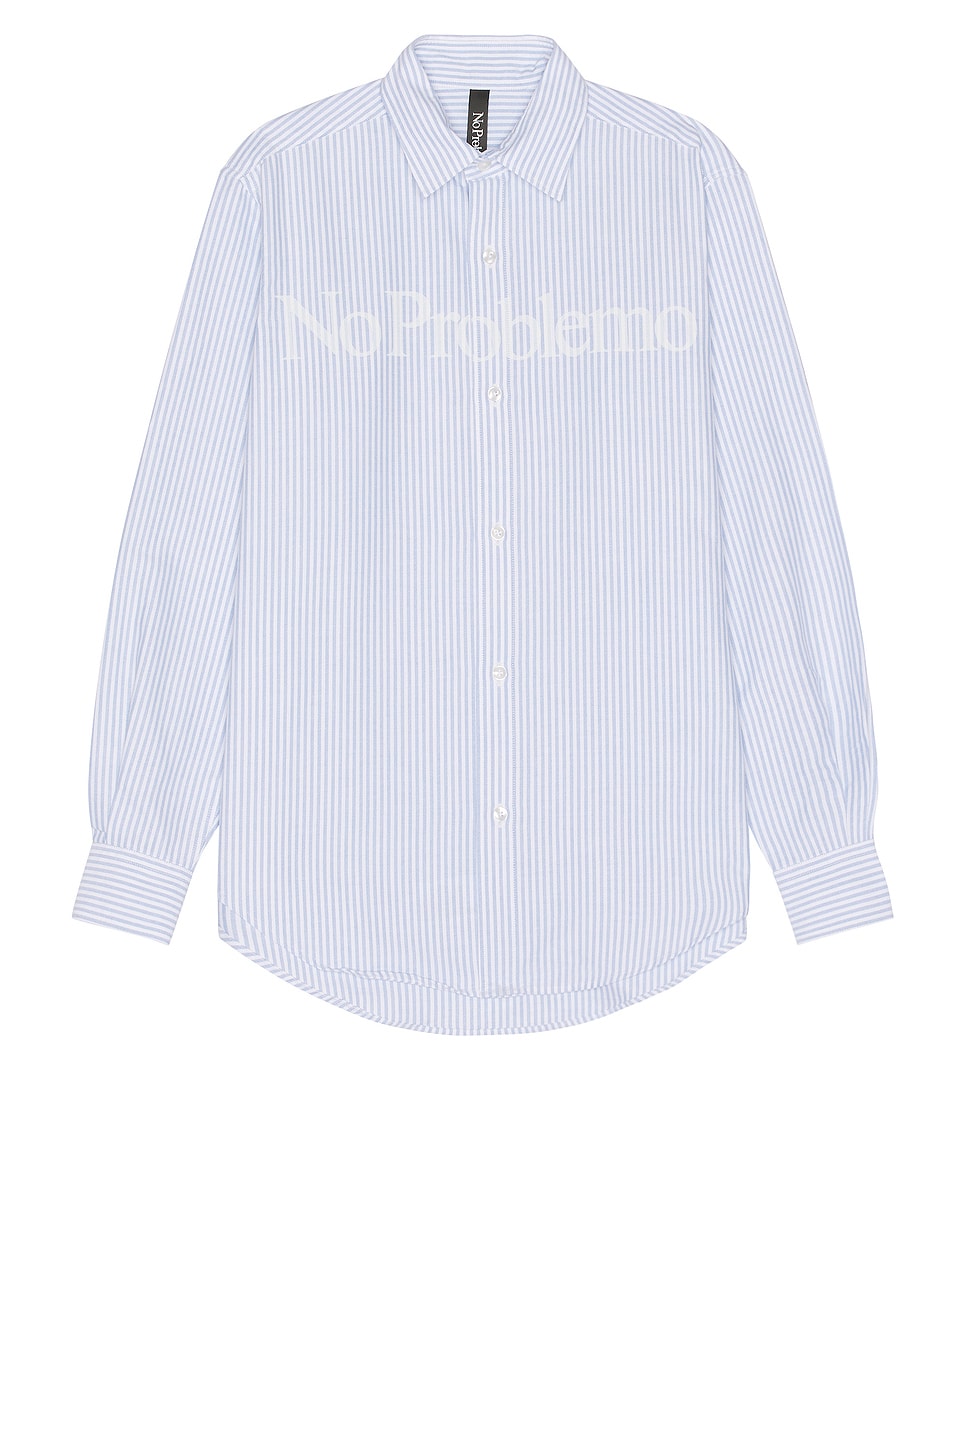 Image 1 of No Problemo Oxford Shirt in Blue